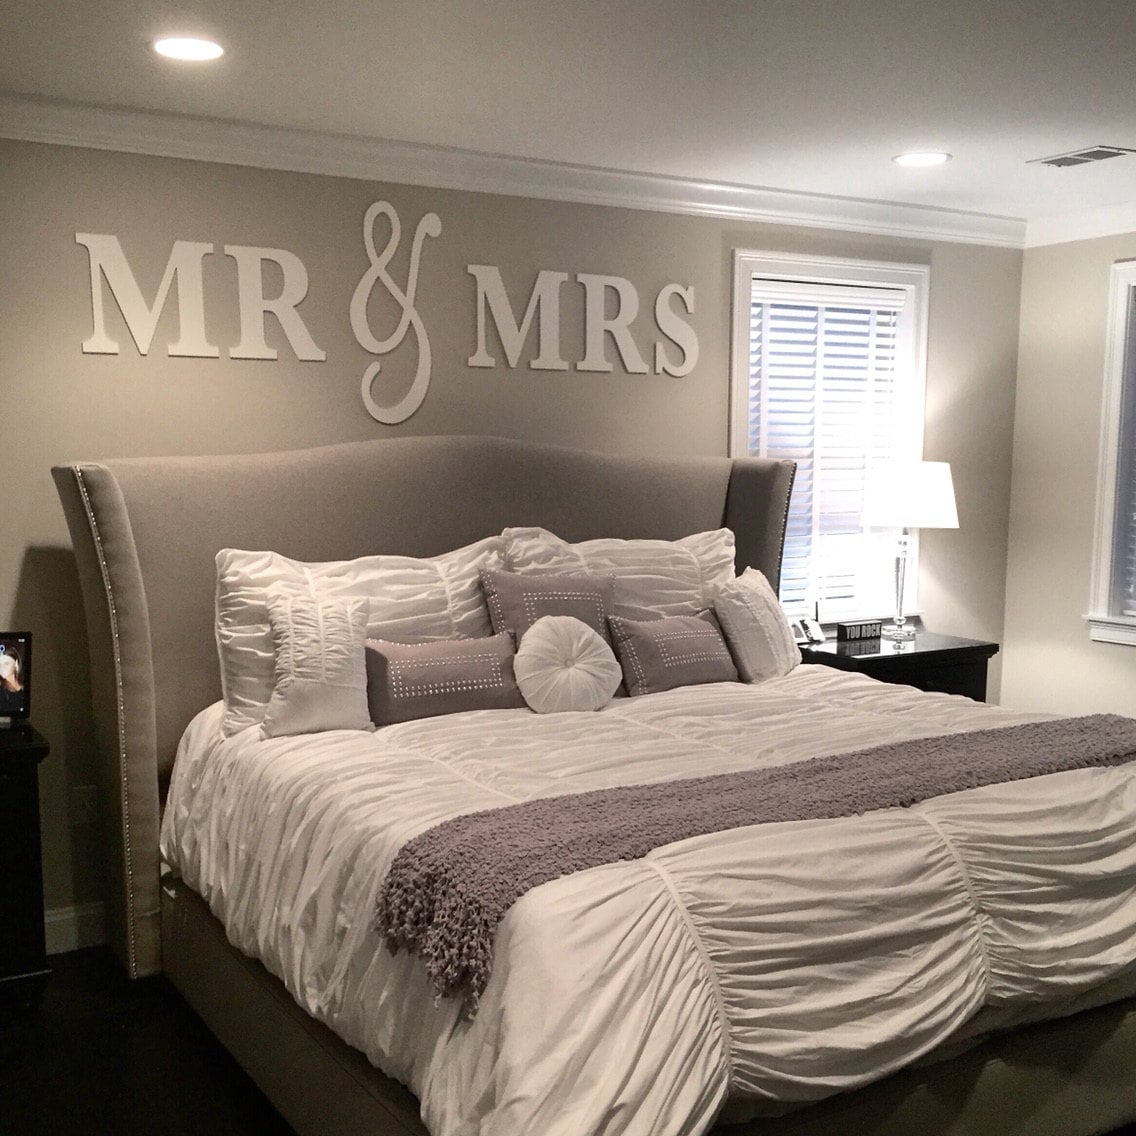 Mr & Mrs Wall Sign Above Bed Decor Mr and Mrs Sign for Over